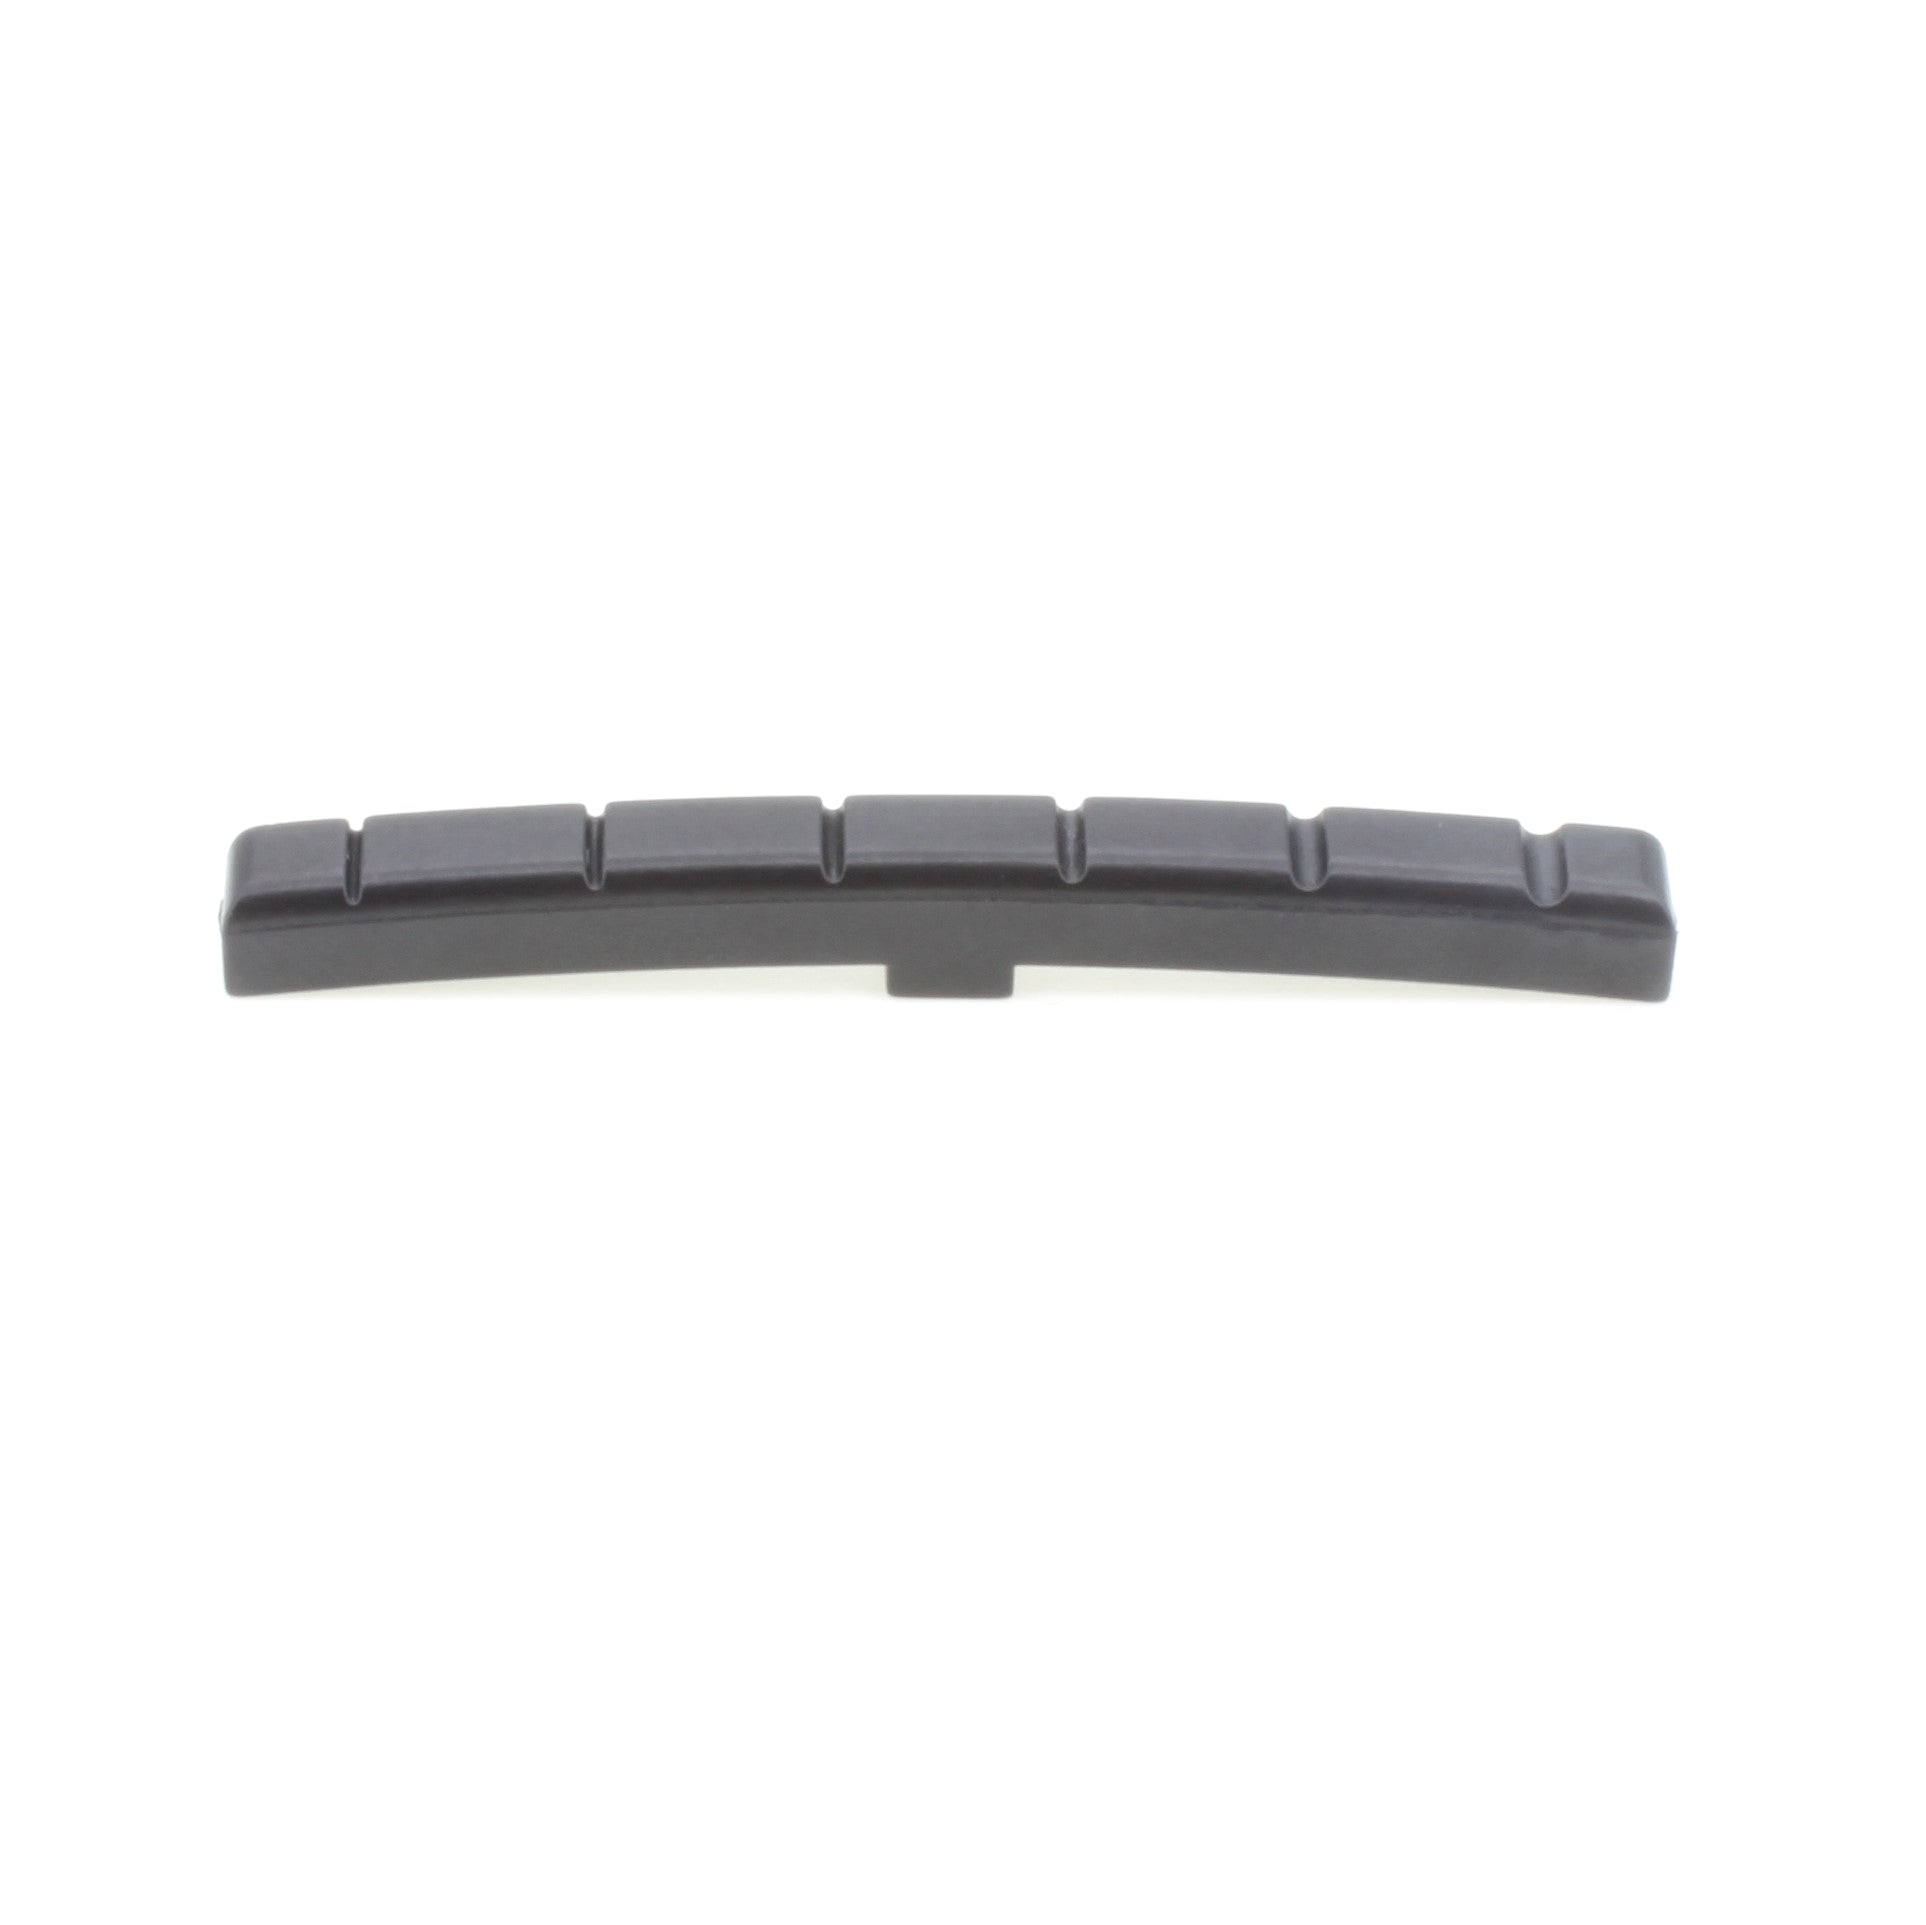 Model 5072-00 Nut Slotted Flat or Curved Bottom R7.25 L43.18mm (Select  Material)